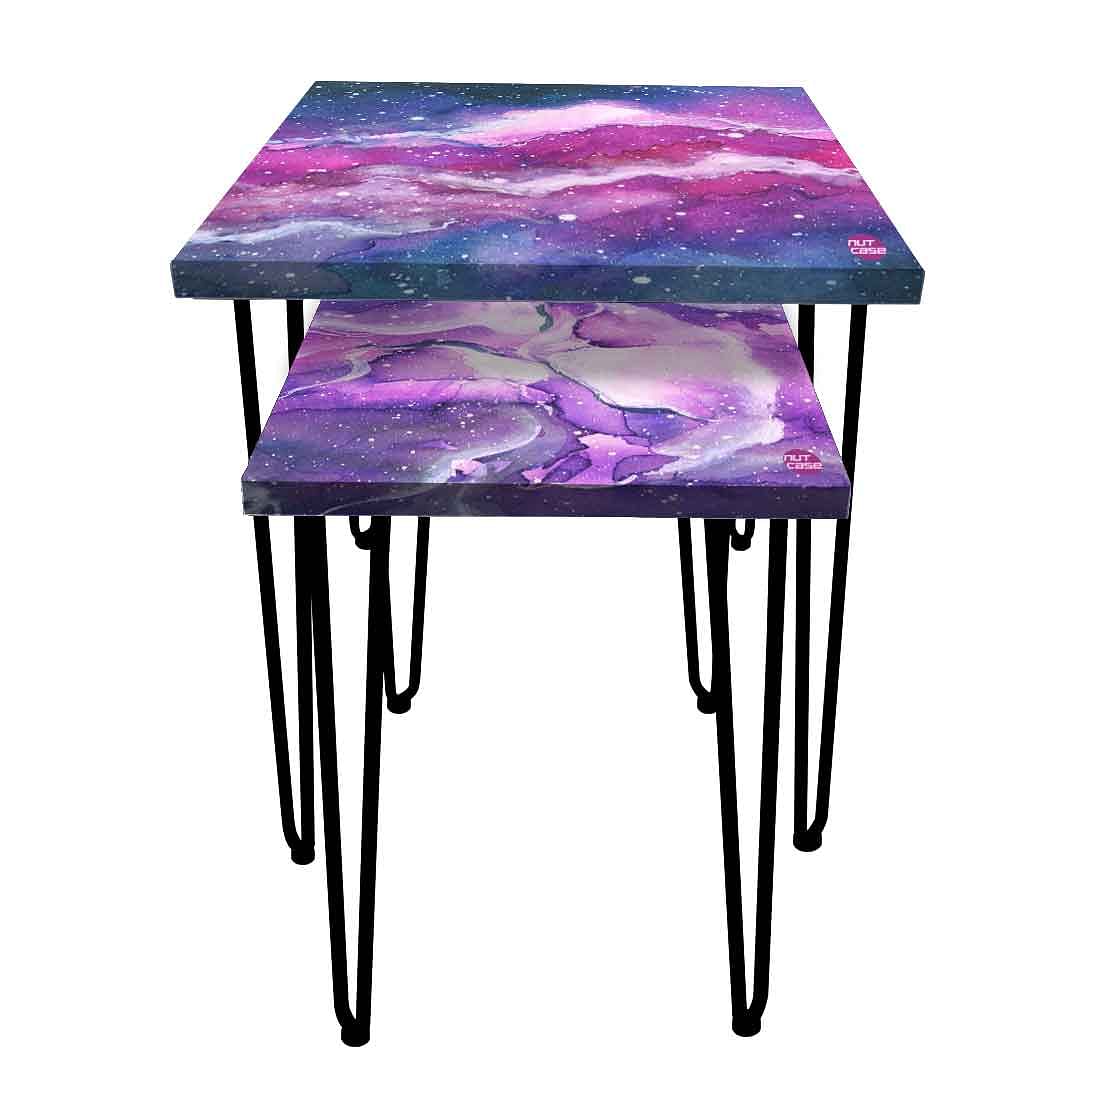 Nesting Tables for Living Room Office & Balcony  Set of 2 - Space Purple Nutcase